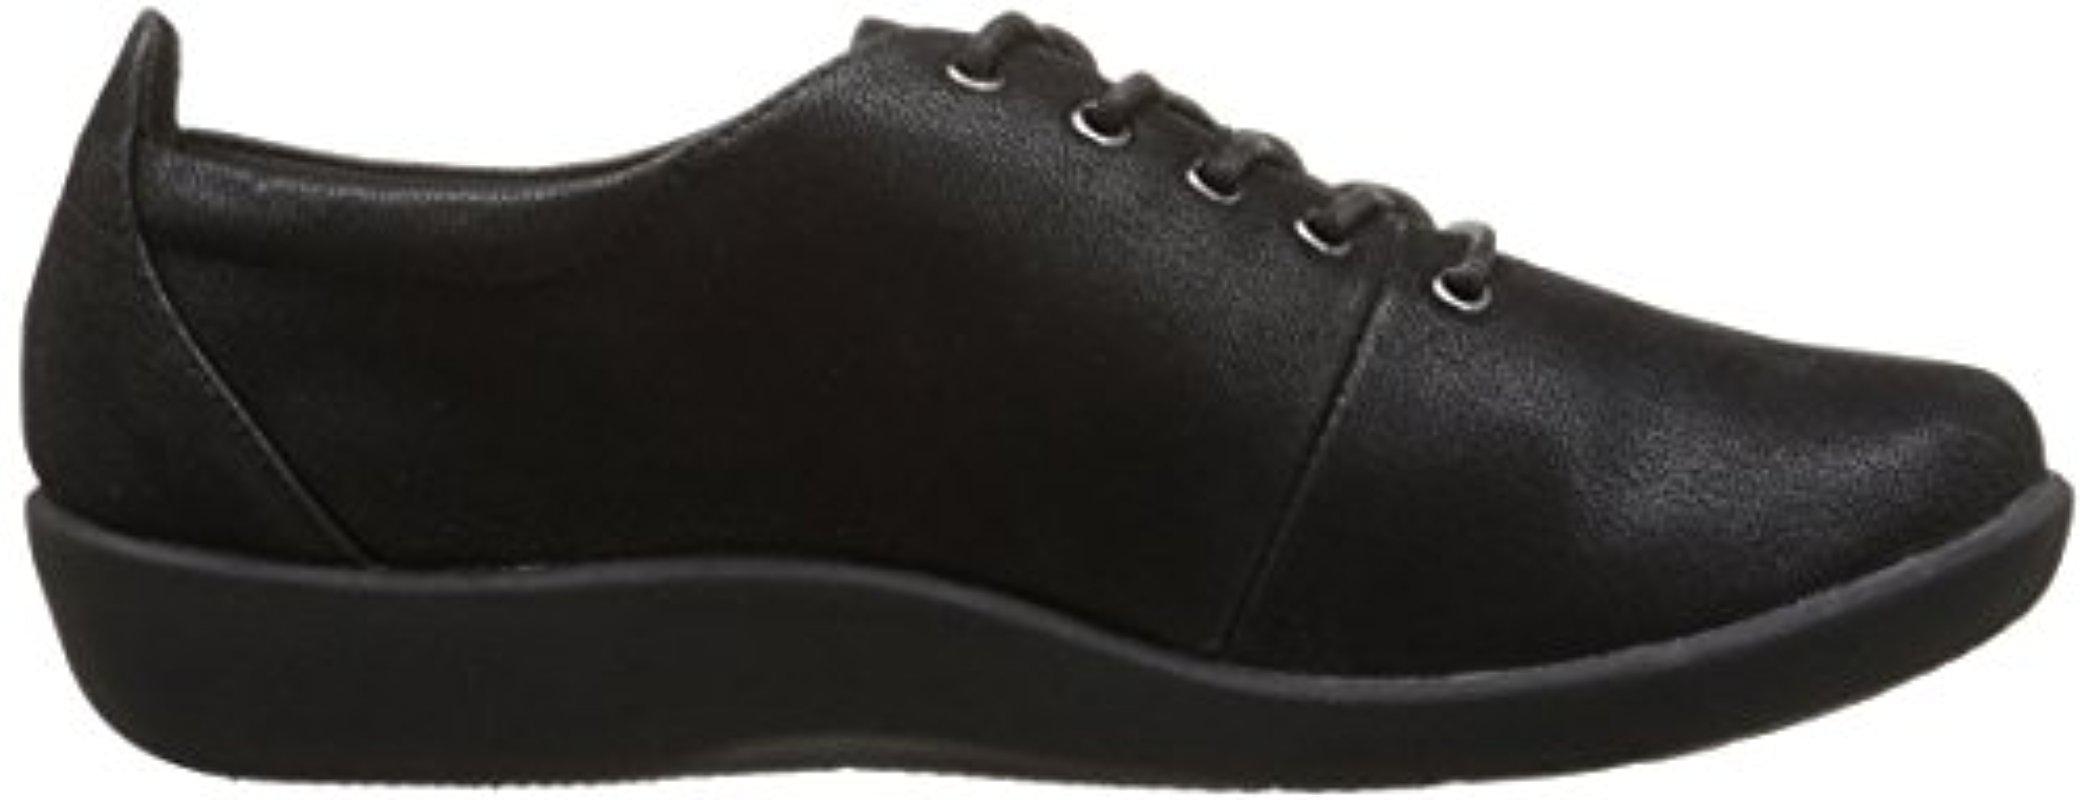 Ladies Clarks Cloud Steppers Lace Up Shoes Sillian Tino 